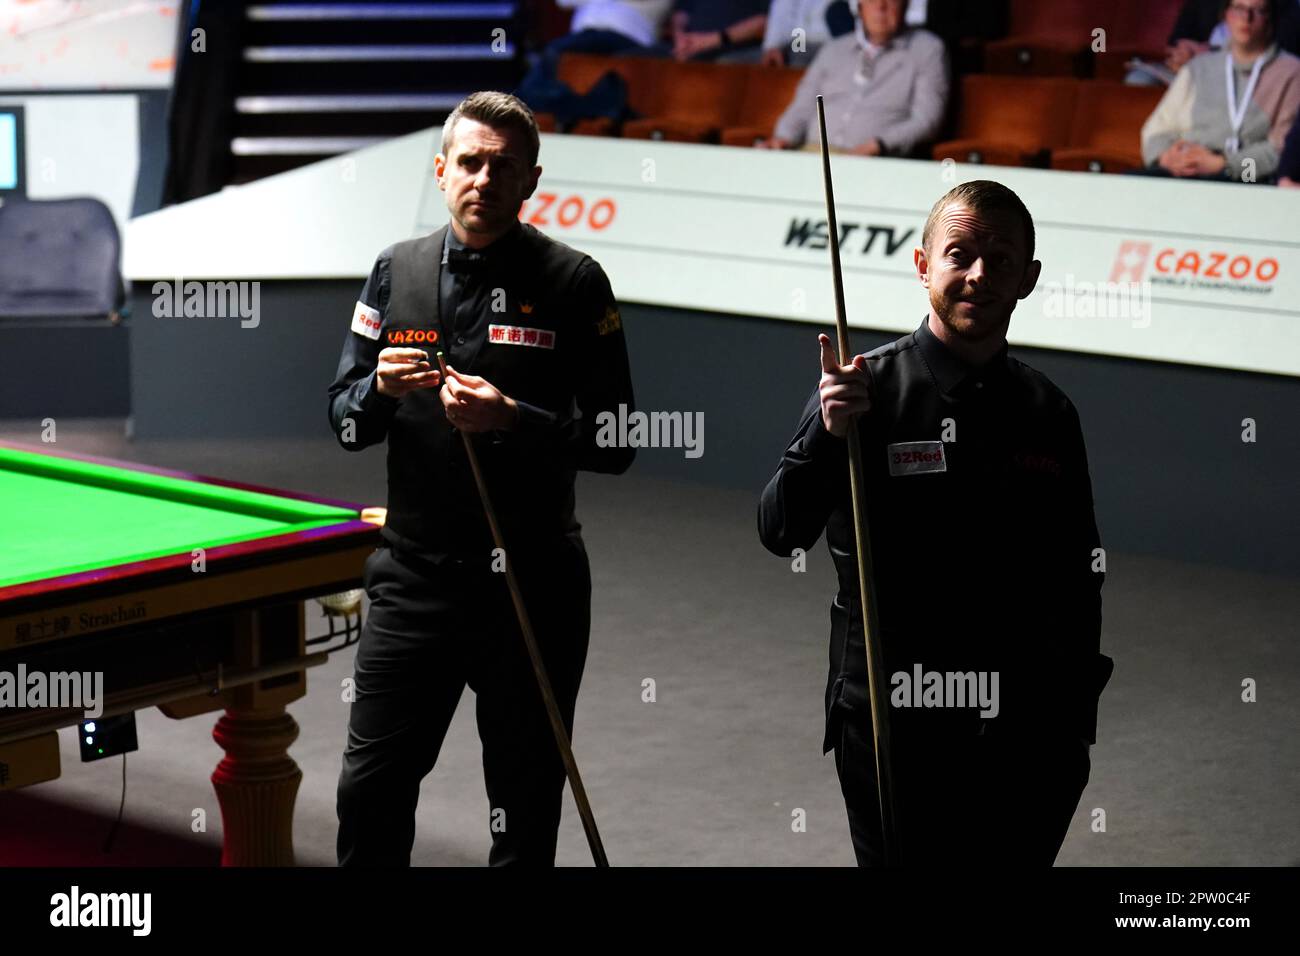 Mark Allen during his match with Mark Selby on day eight of the Betfred World Snooker Championships 2021 at The Crucible, Sheffield